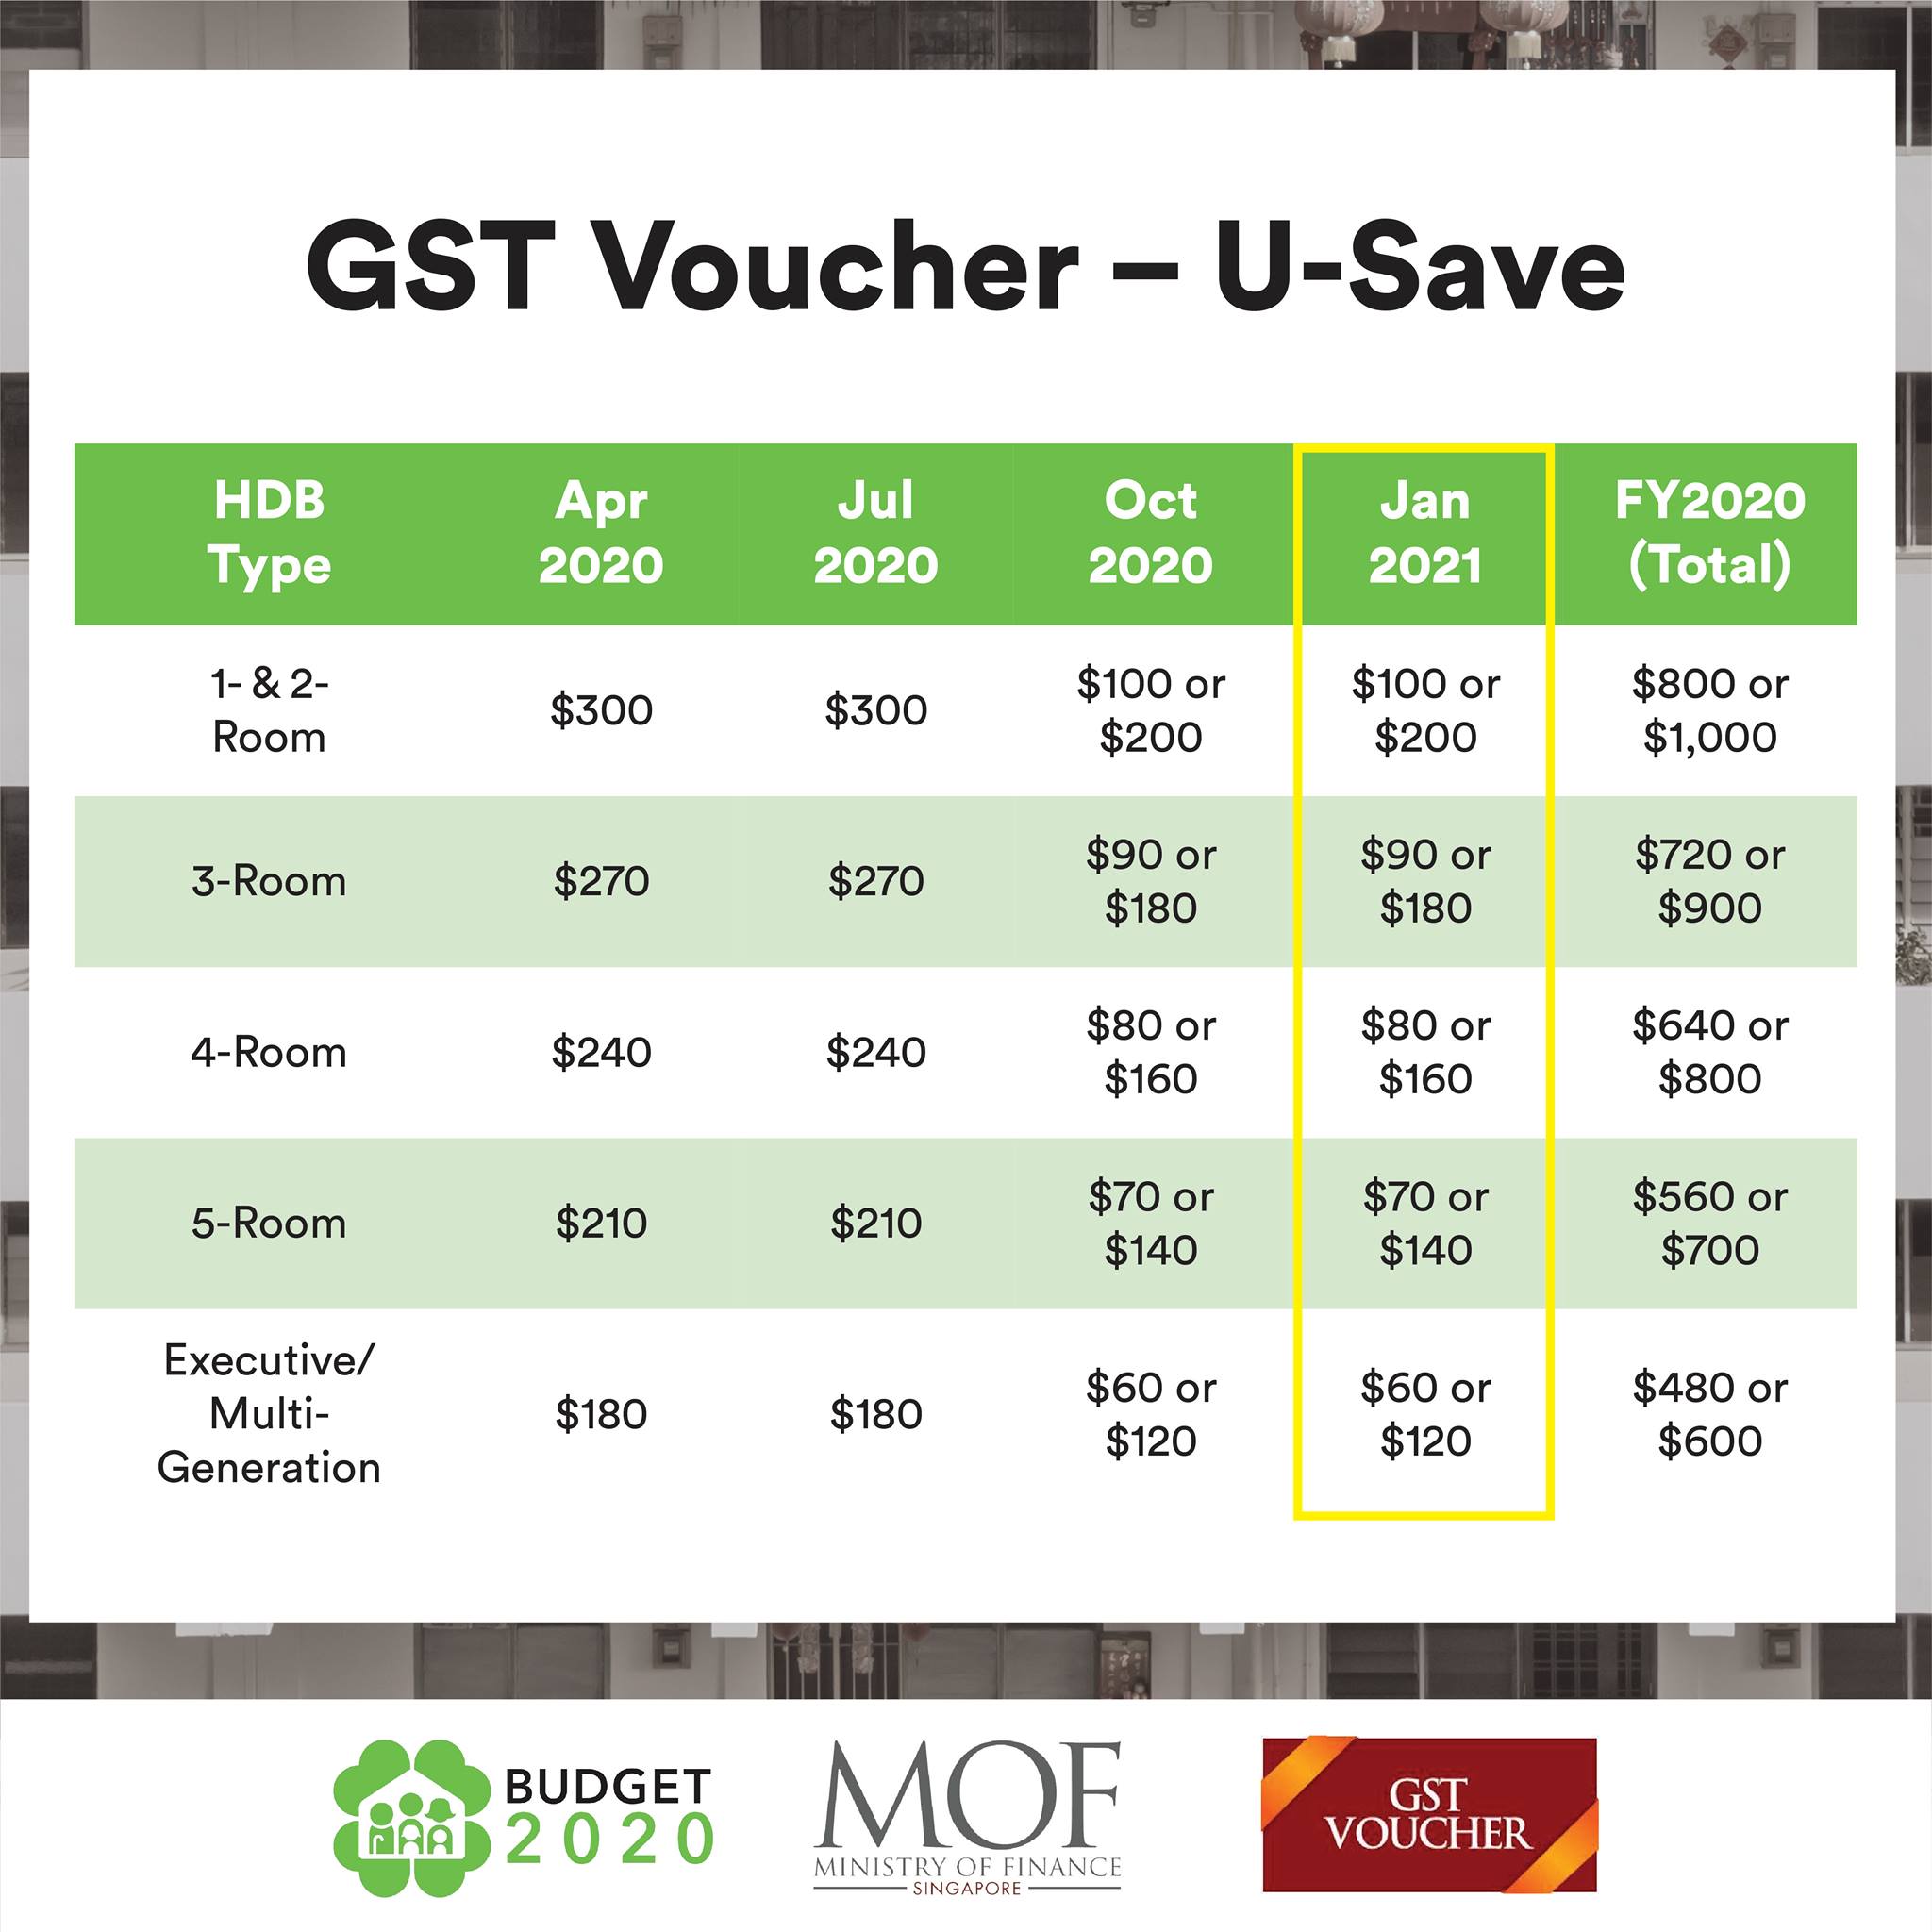 940,000 households in S'pore will receive double their regular GST